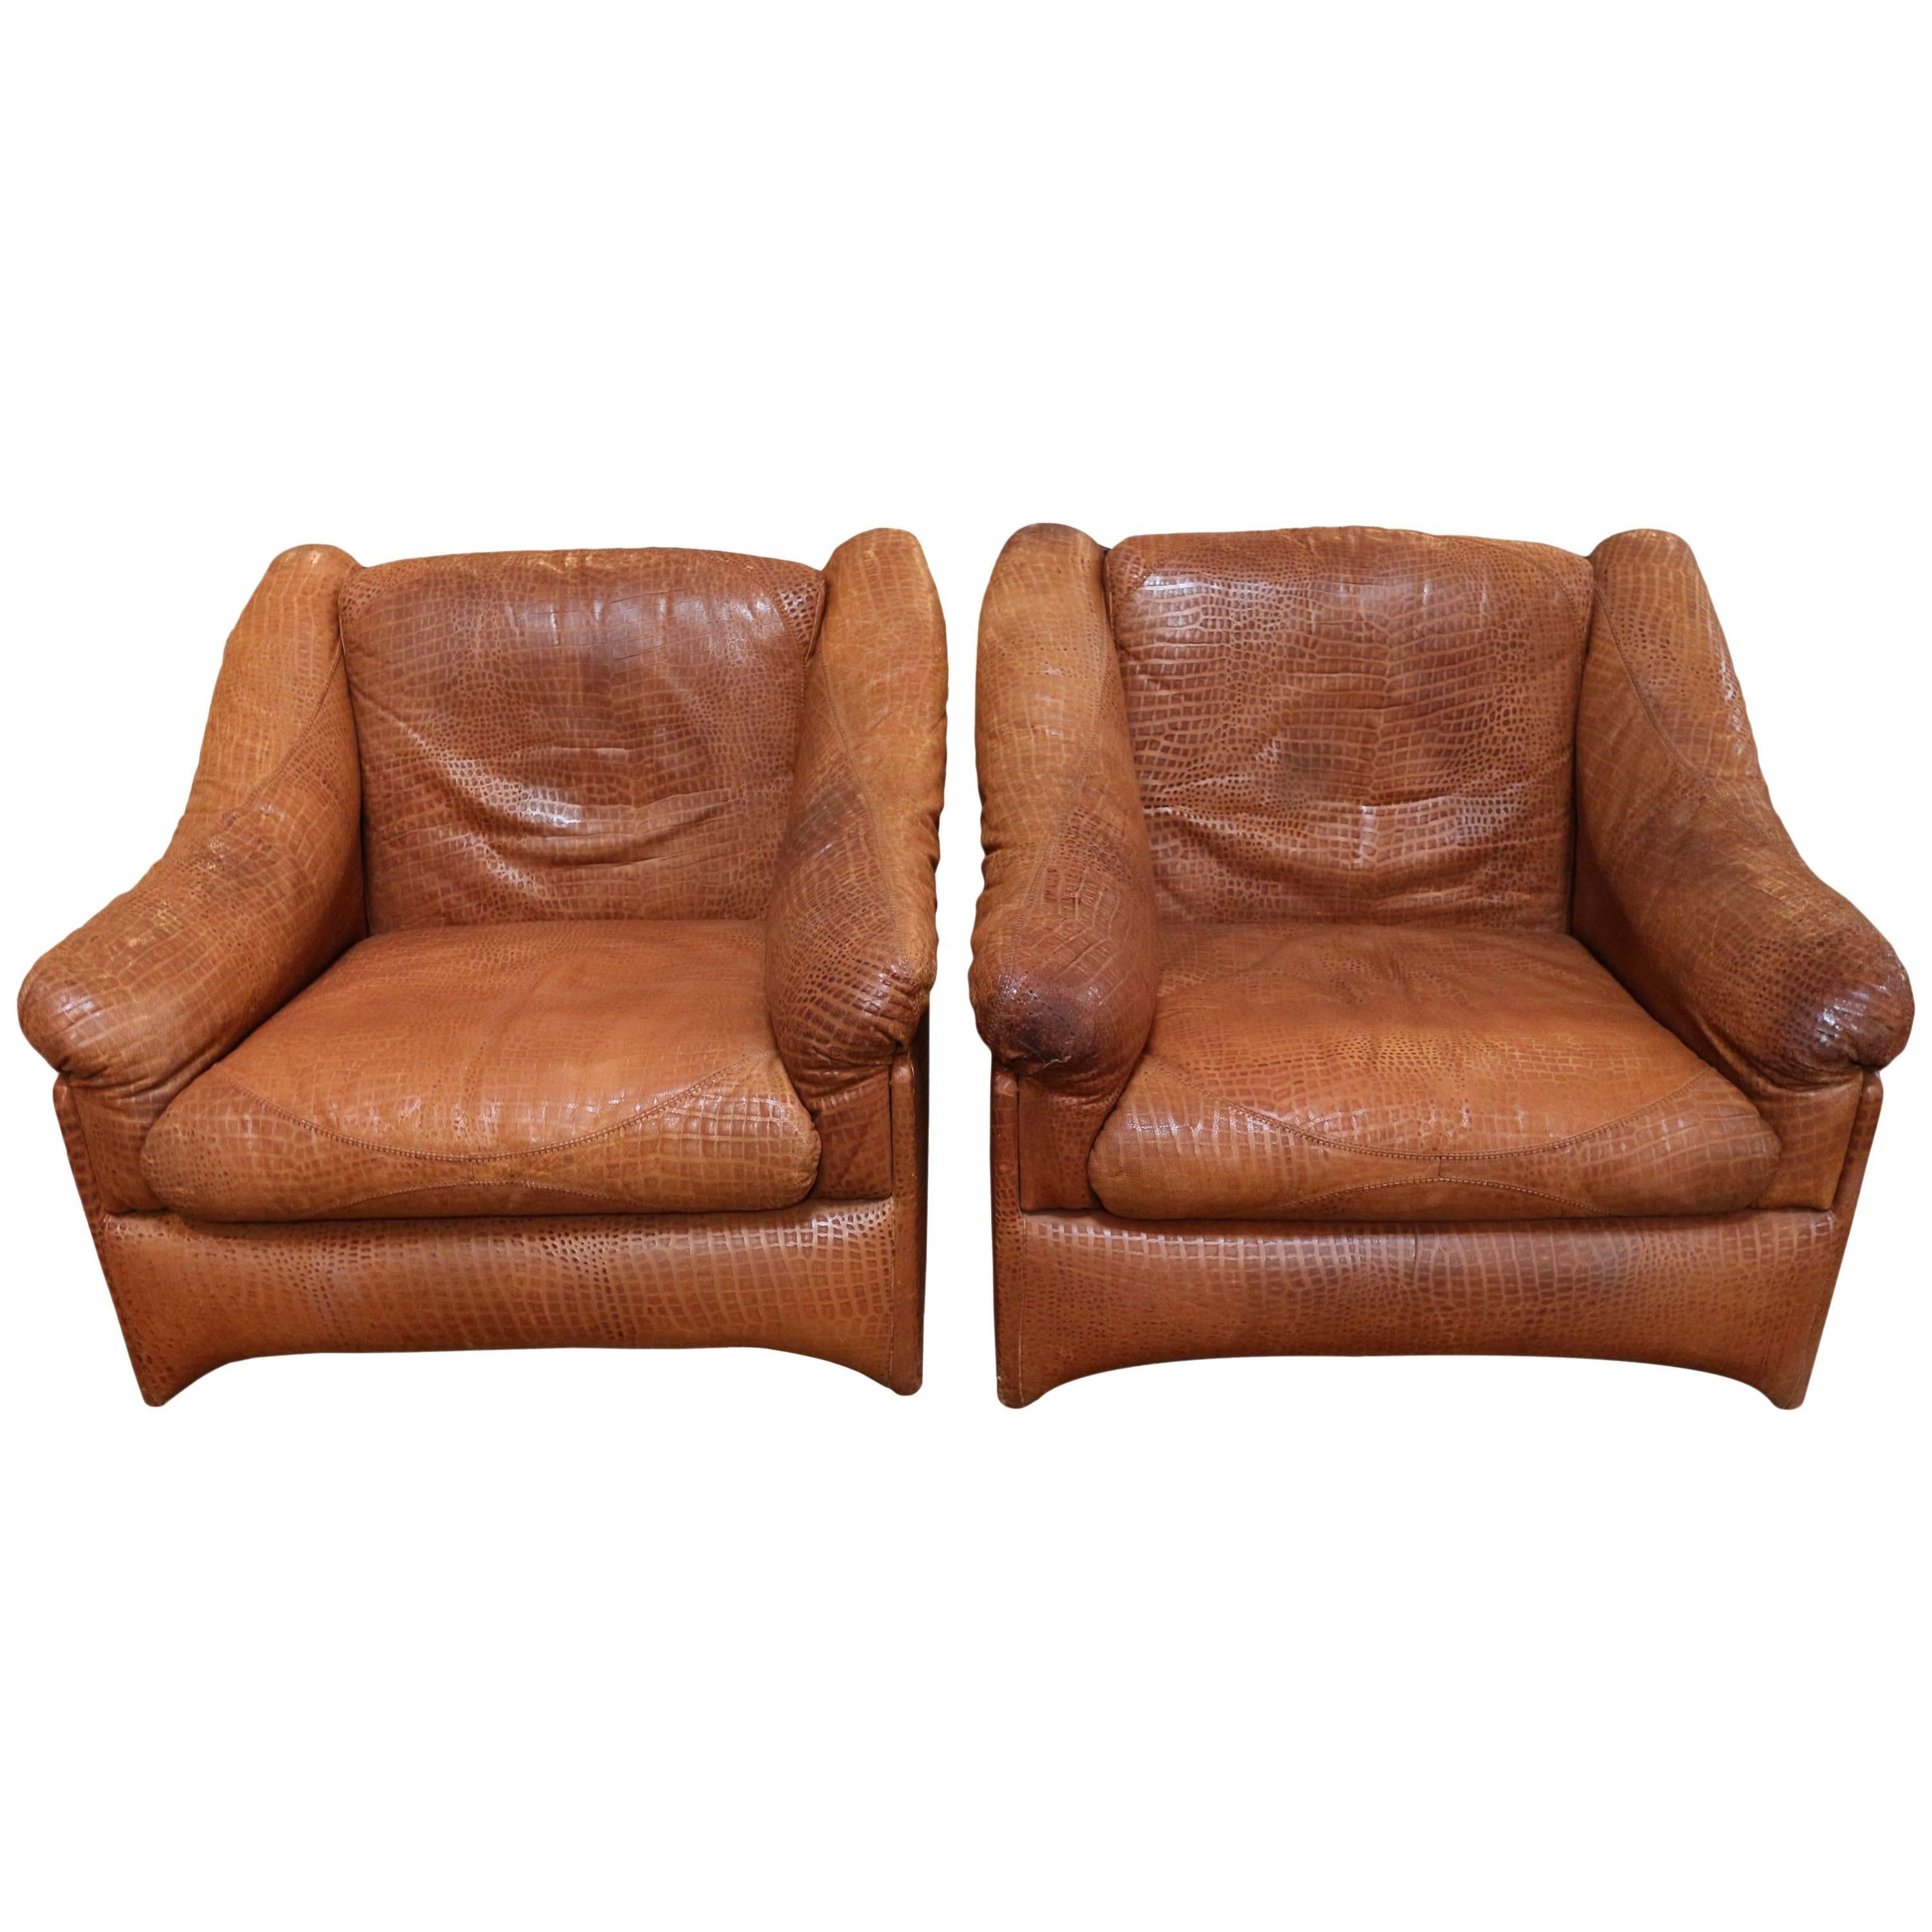 Pair of Valenti Leather Armchairs For Sale